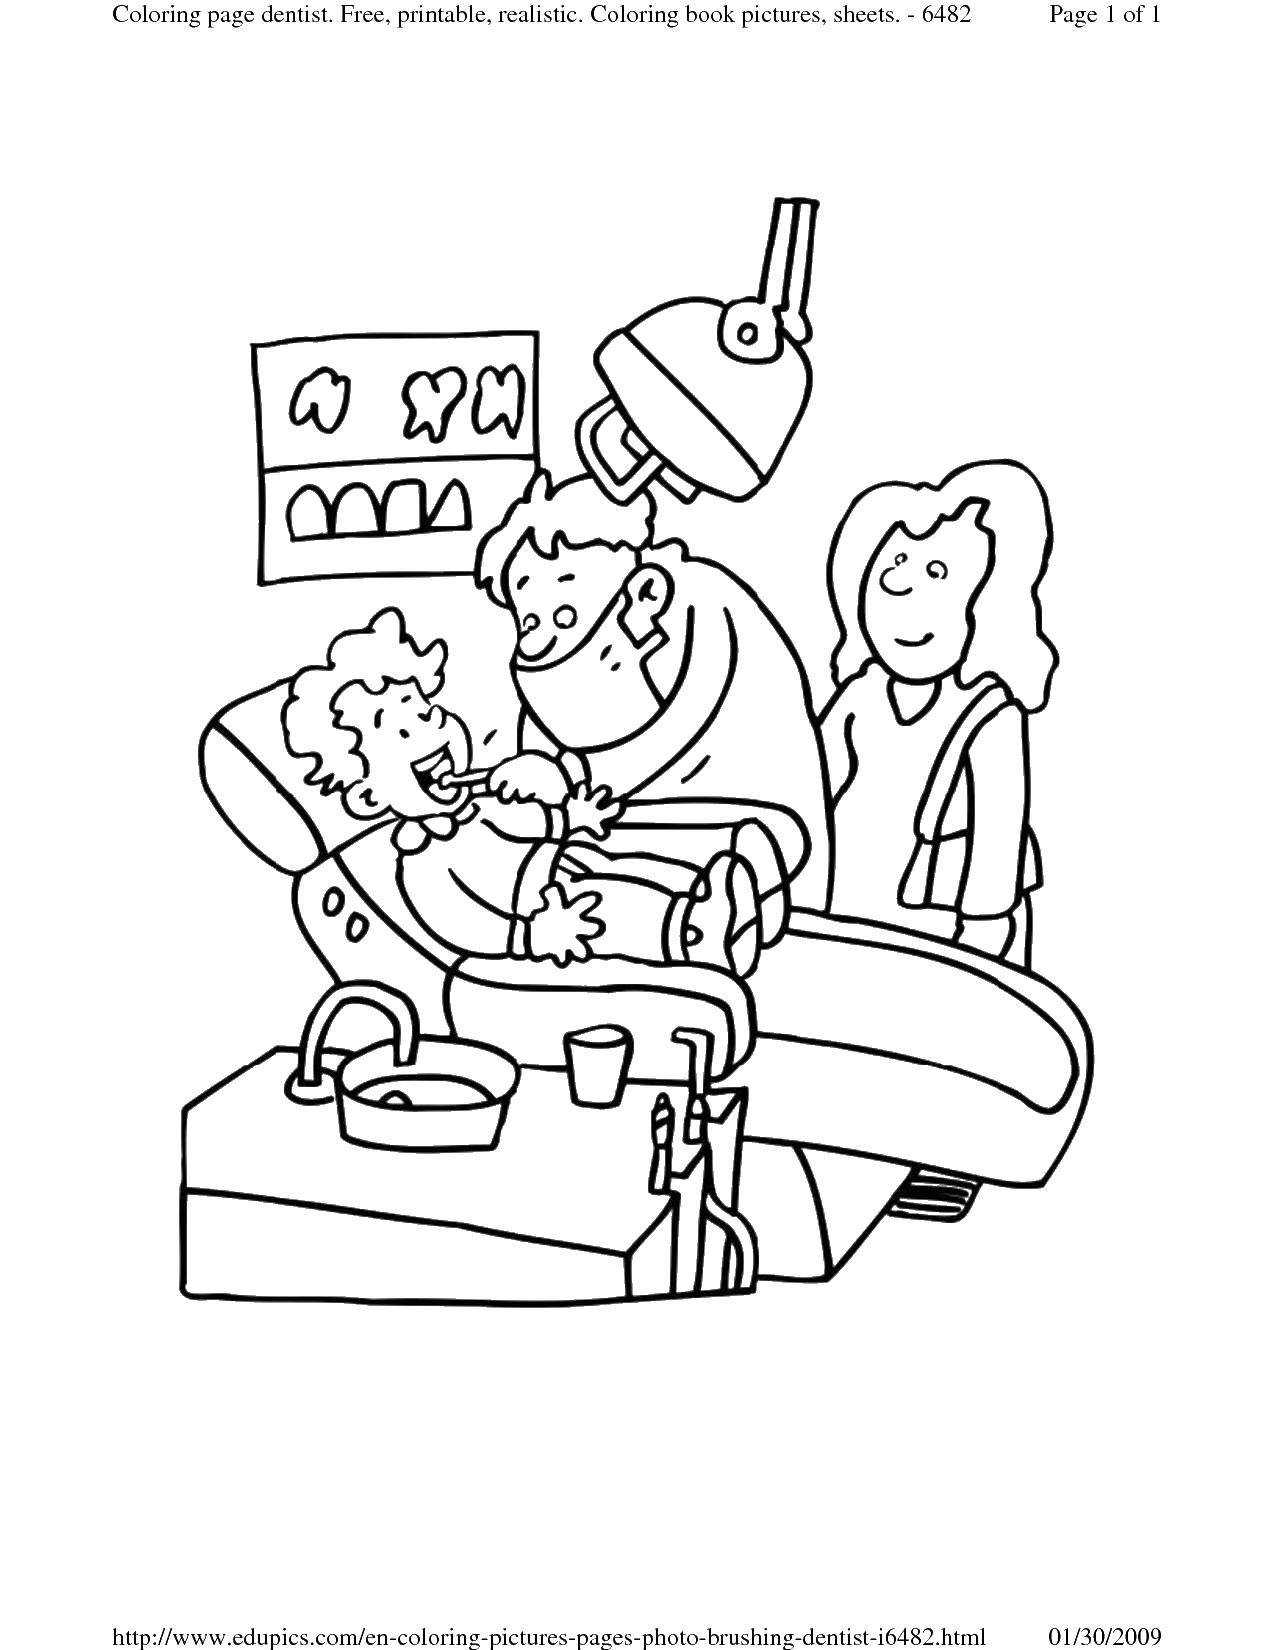 Coloring At the dentist. Category The care of teeth. Tags:  The doctor.